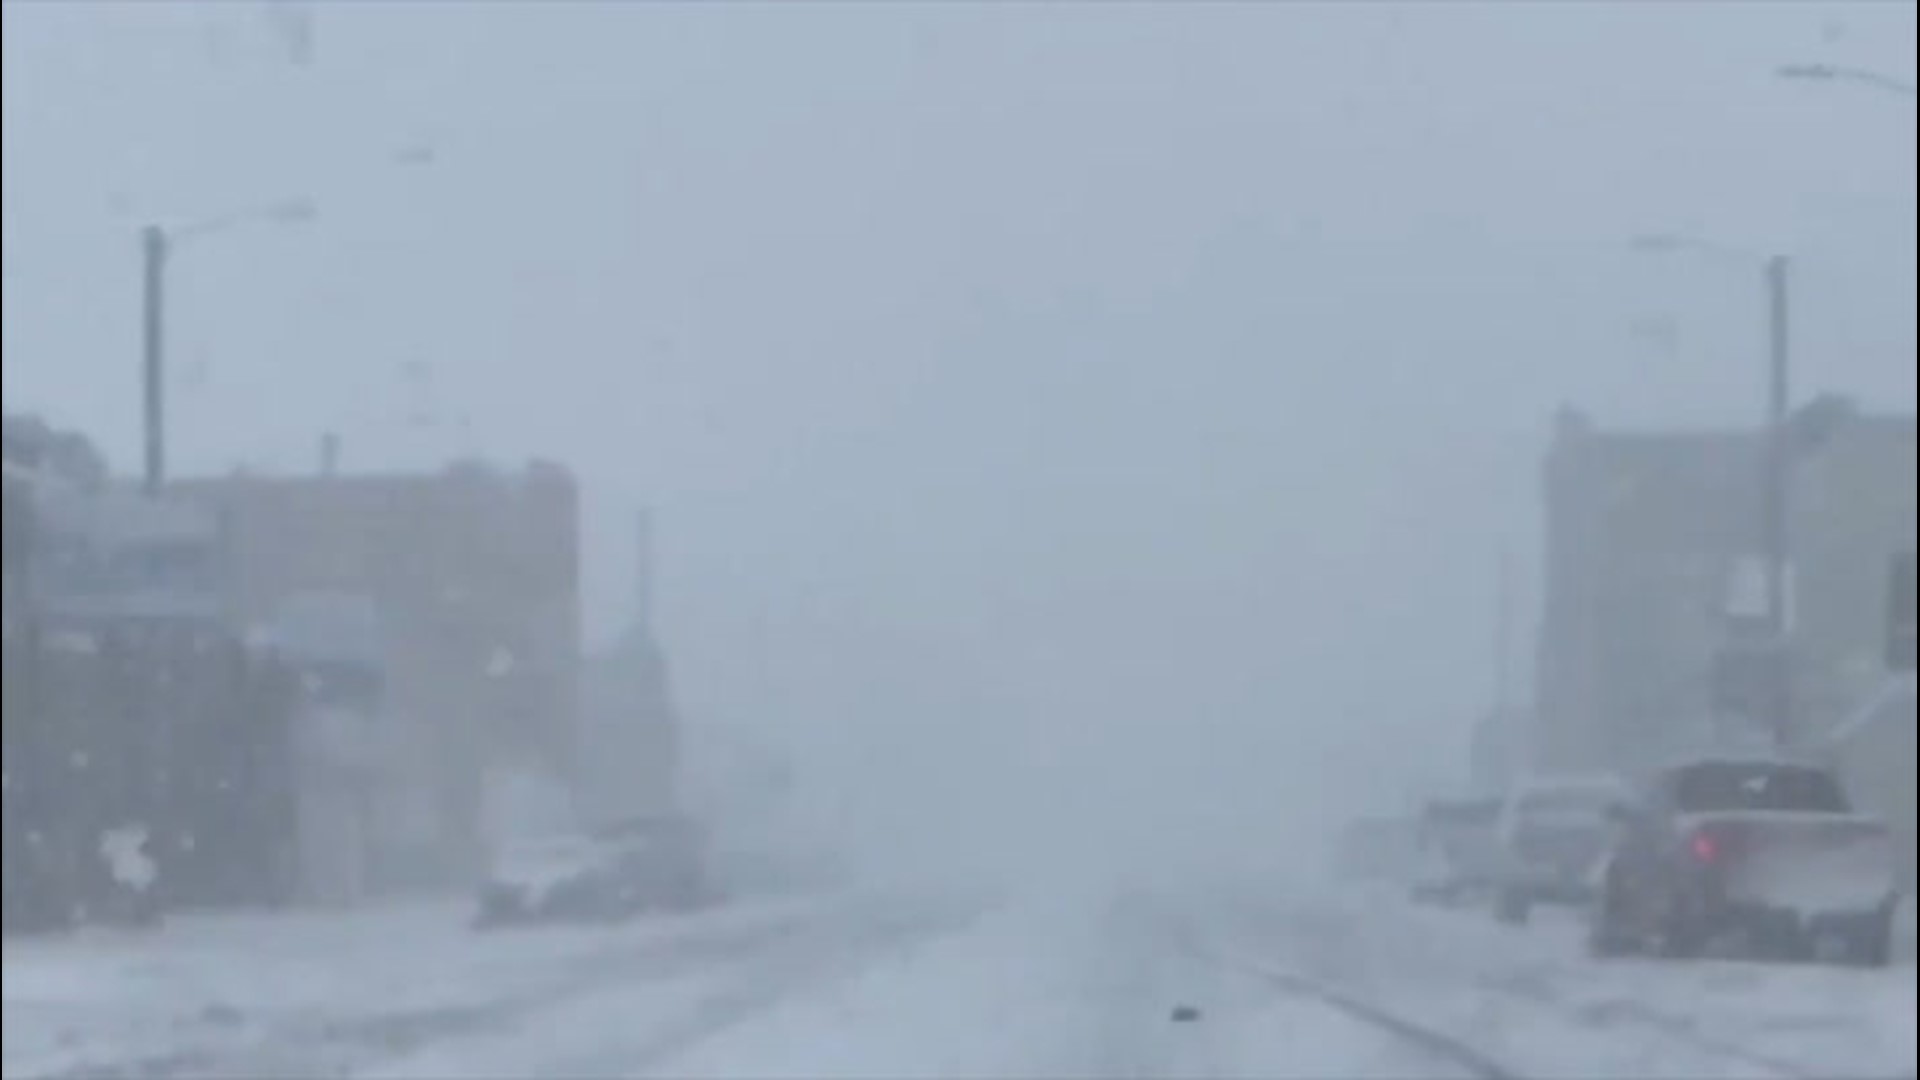 A winter storm warning was issued for parts of Minnesota on Oct. 20, as snow and winds made for difficult conditions in Graceville, Minnesota.